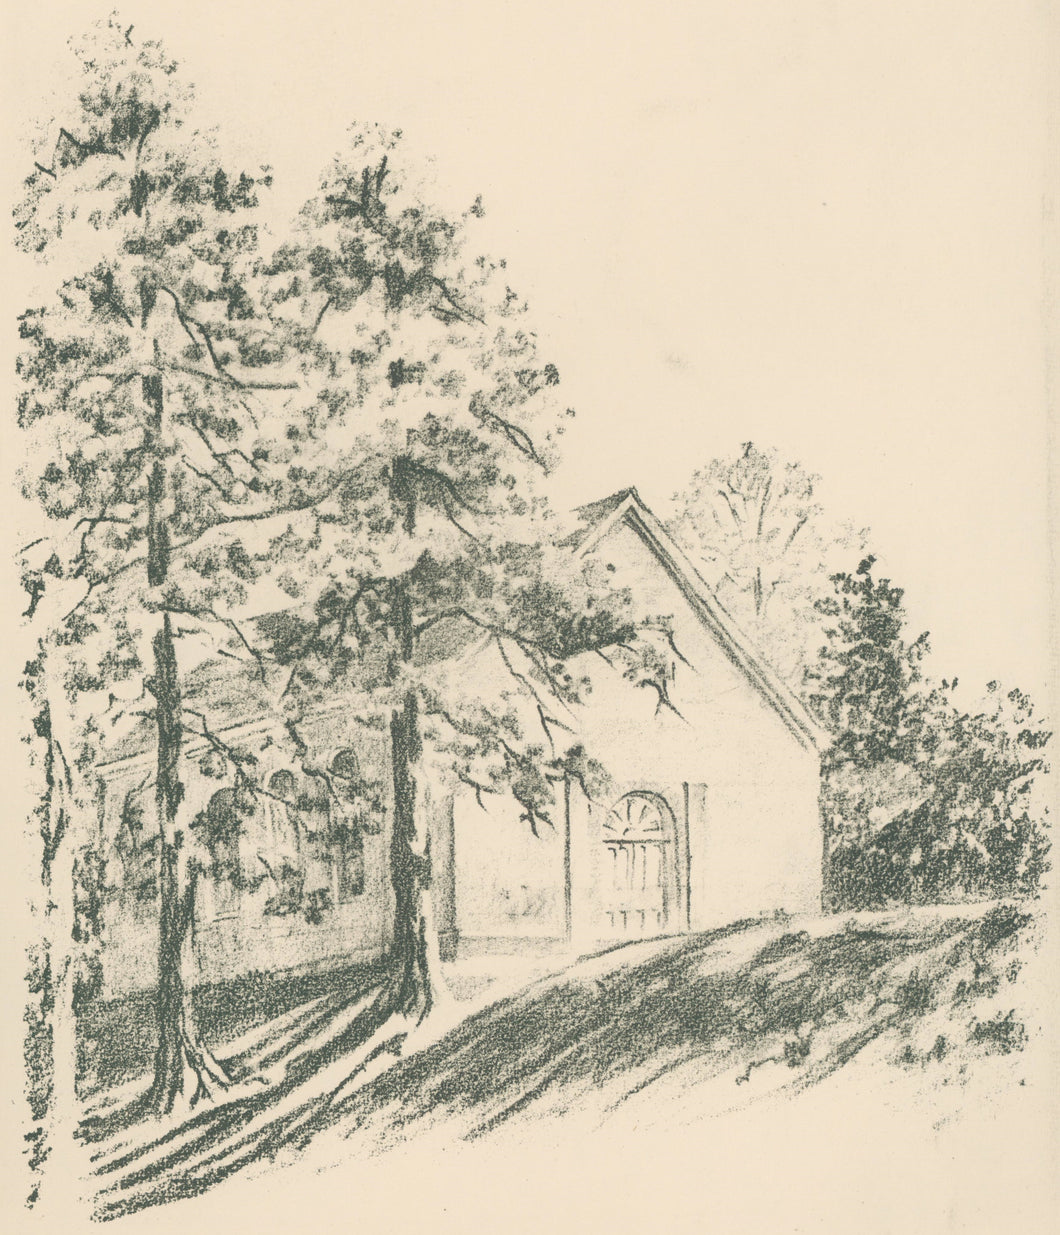 White, Theo Ballou [Little Chapel in the Woods, Virginia]